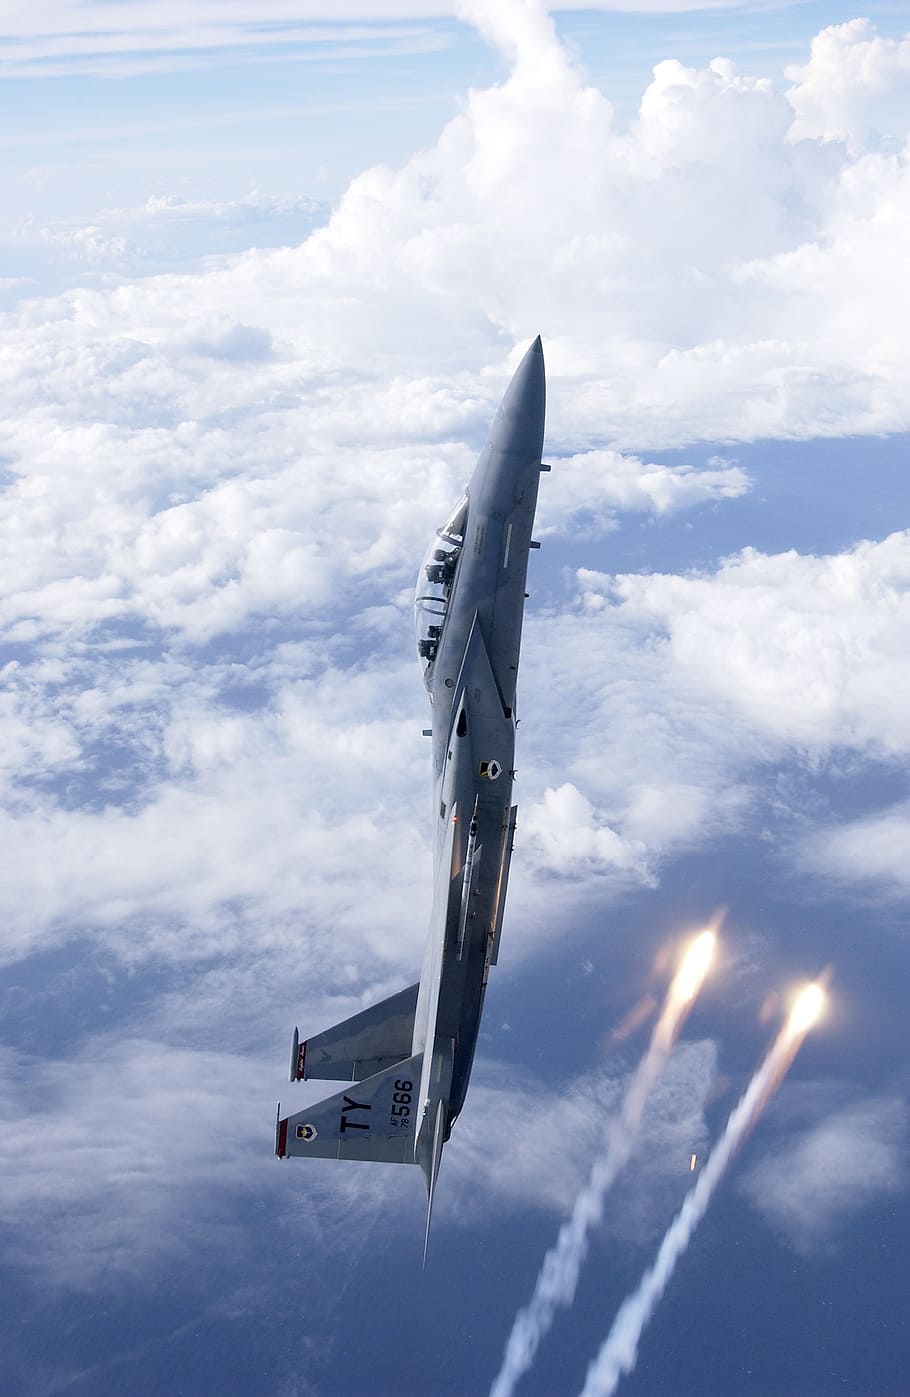 gray, aircraft, mid-air, daytime, air force, fighter jet, battle hunter, launch, vertical, f 15